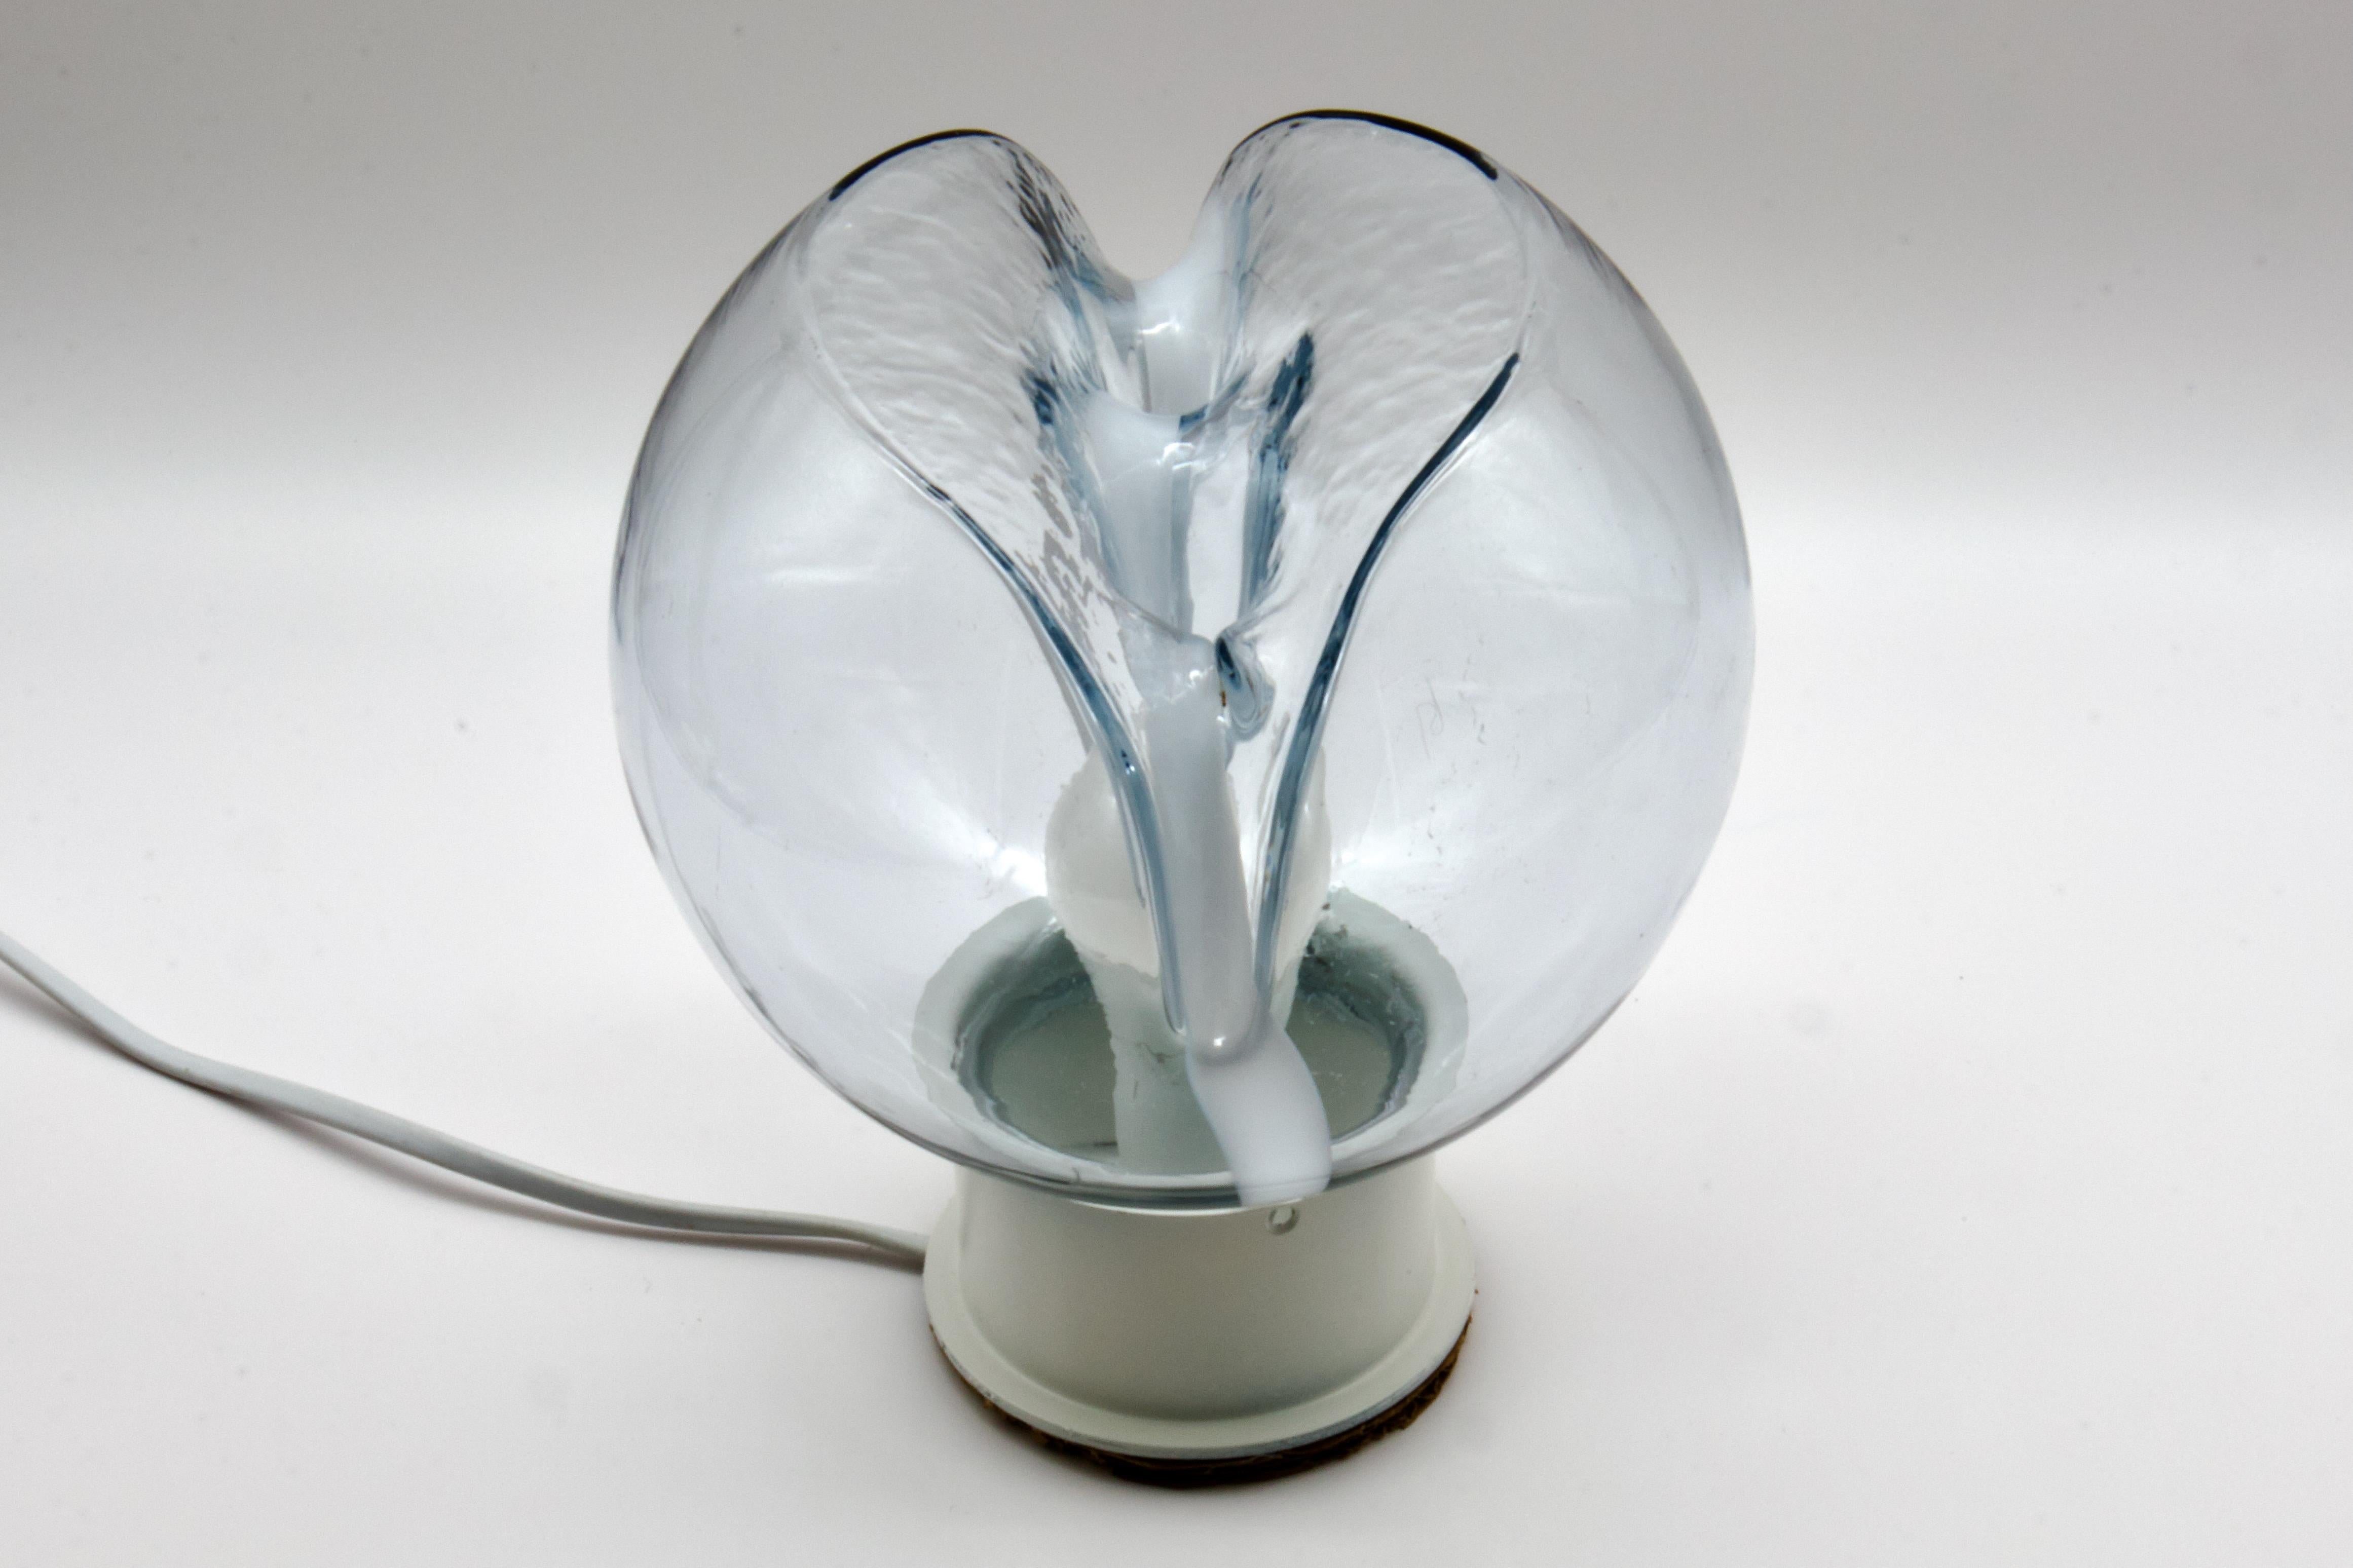 Artistic Post Modern Murano Glass Table Lamp, Mazzega Italy 1970s For Sale 8